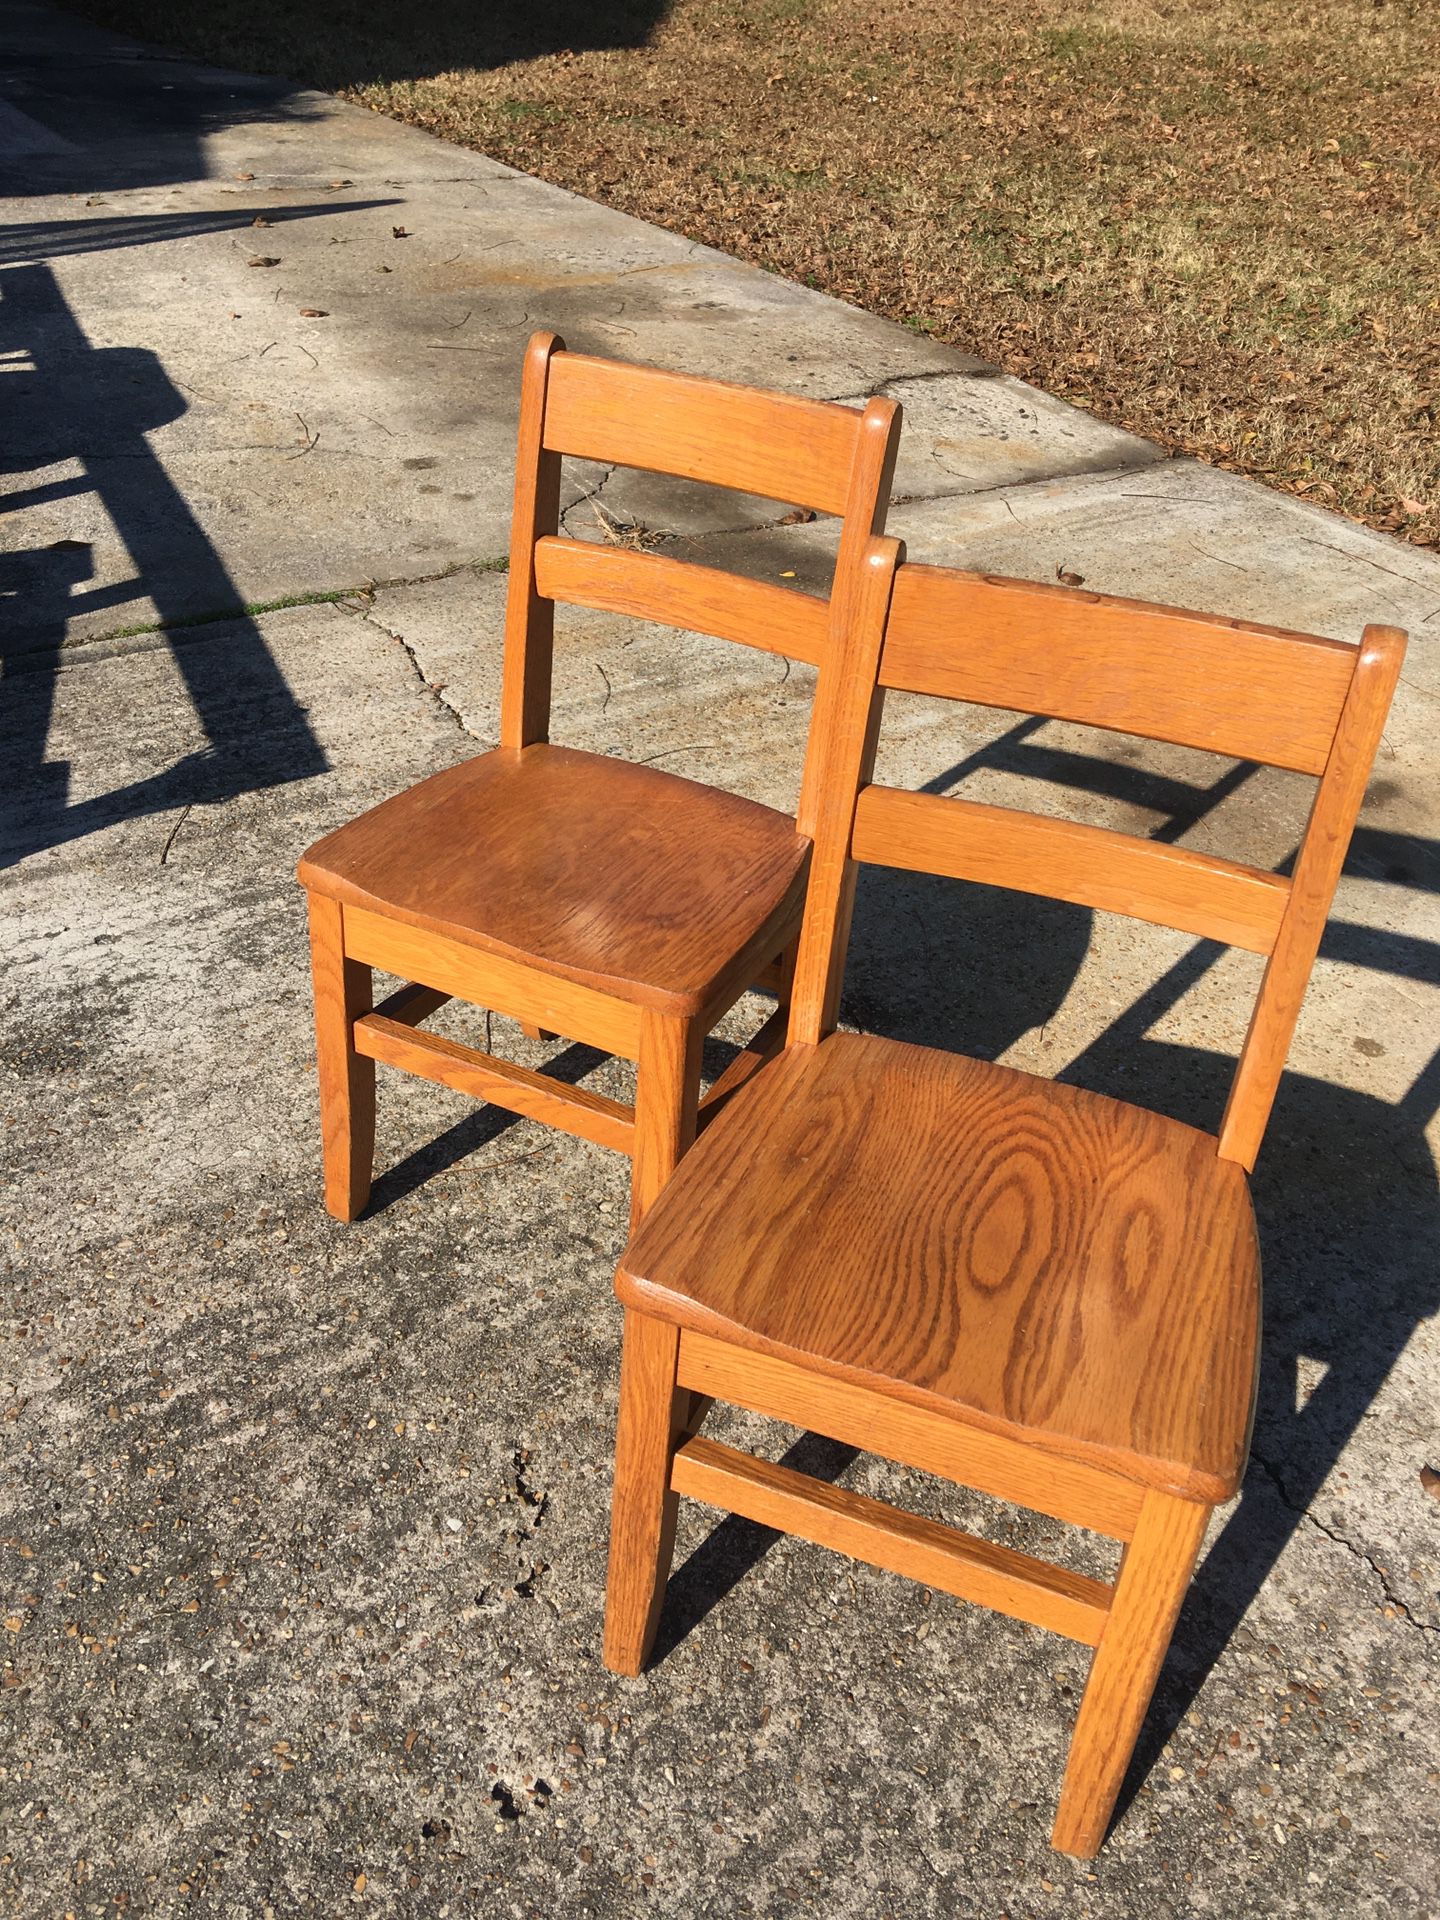 2 Kids solid wood chairs-14 to seat x 27t x13 w